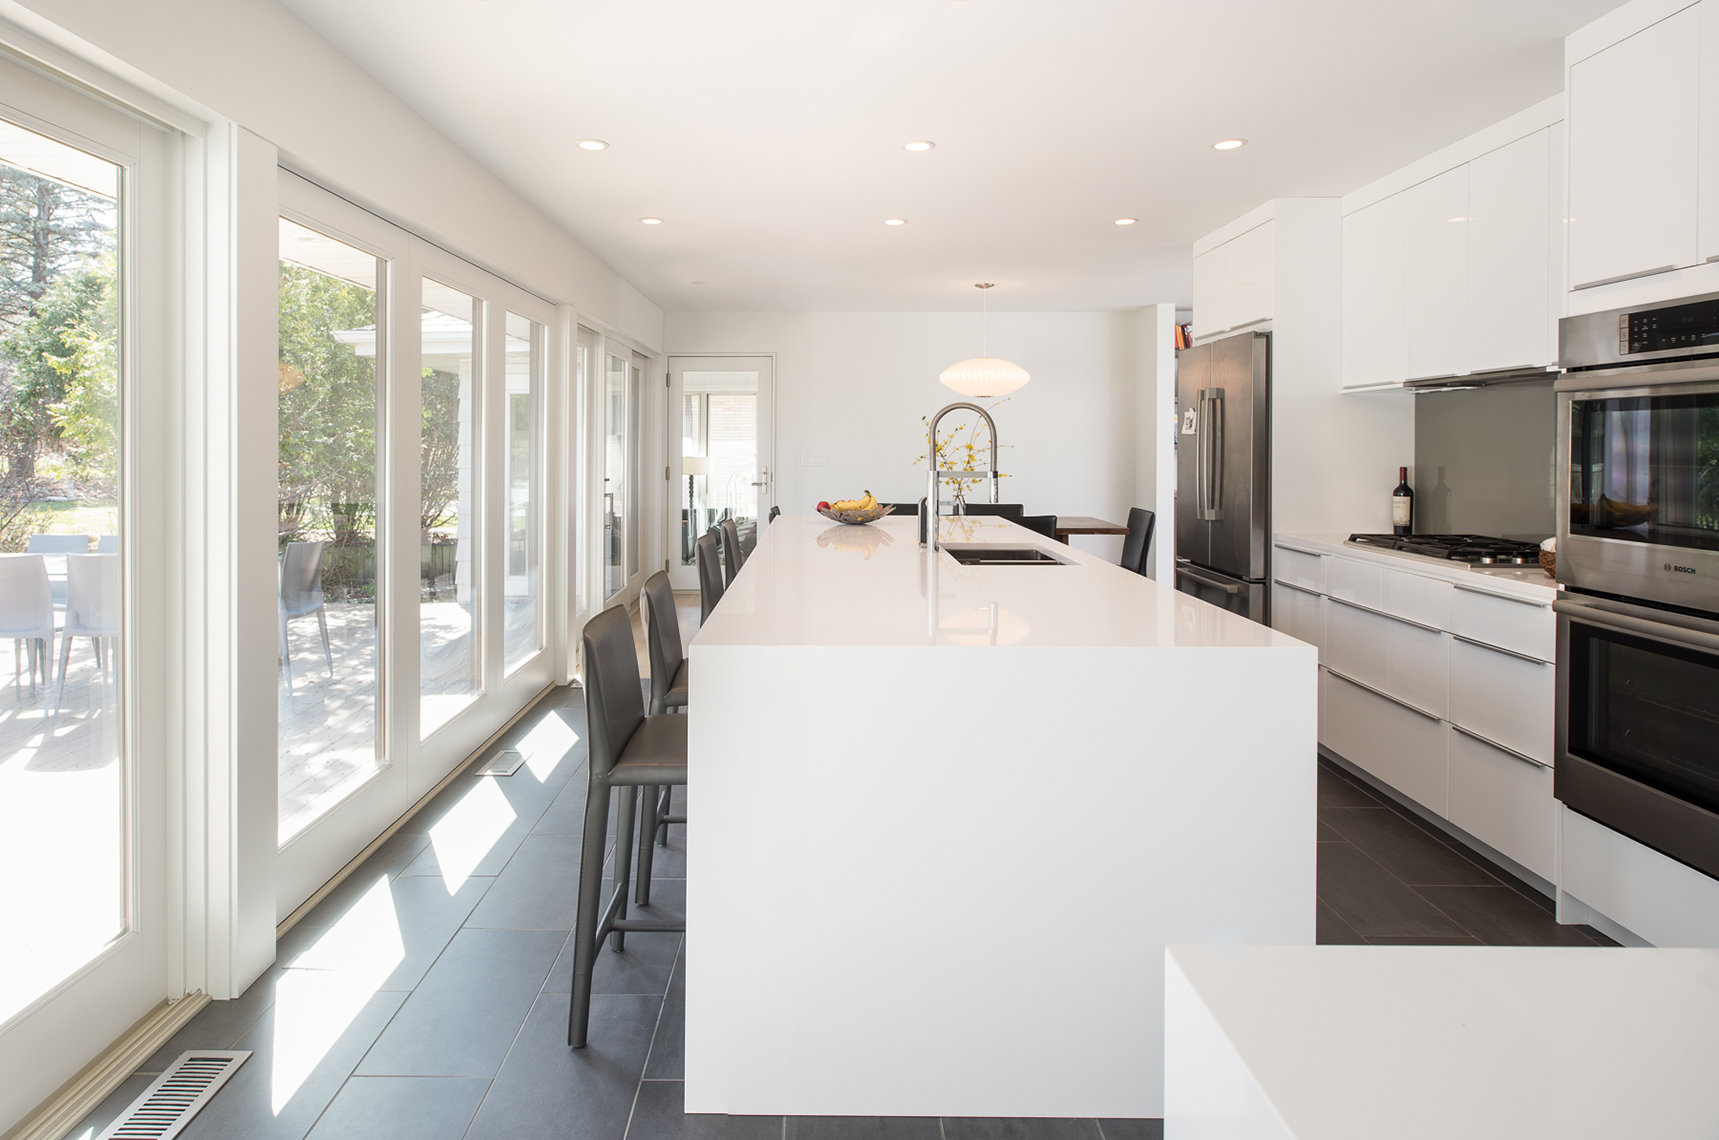 Modern white kitchen renovation in St. Paul, Minnesota by Christian Dean Architecture